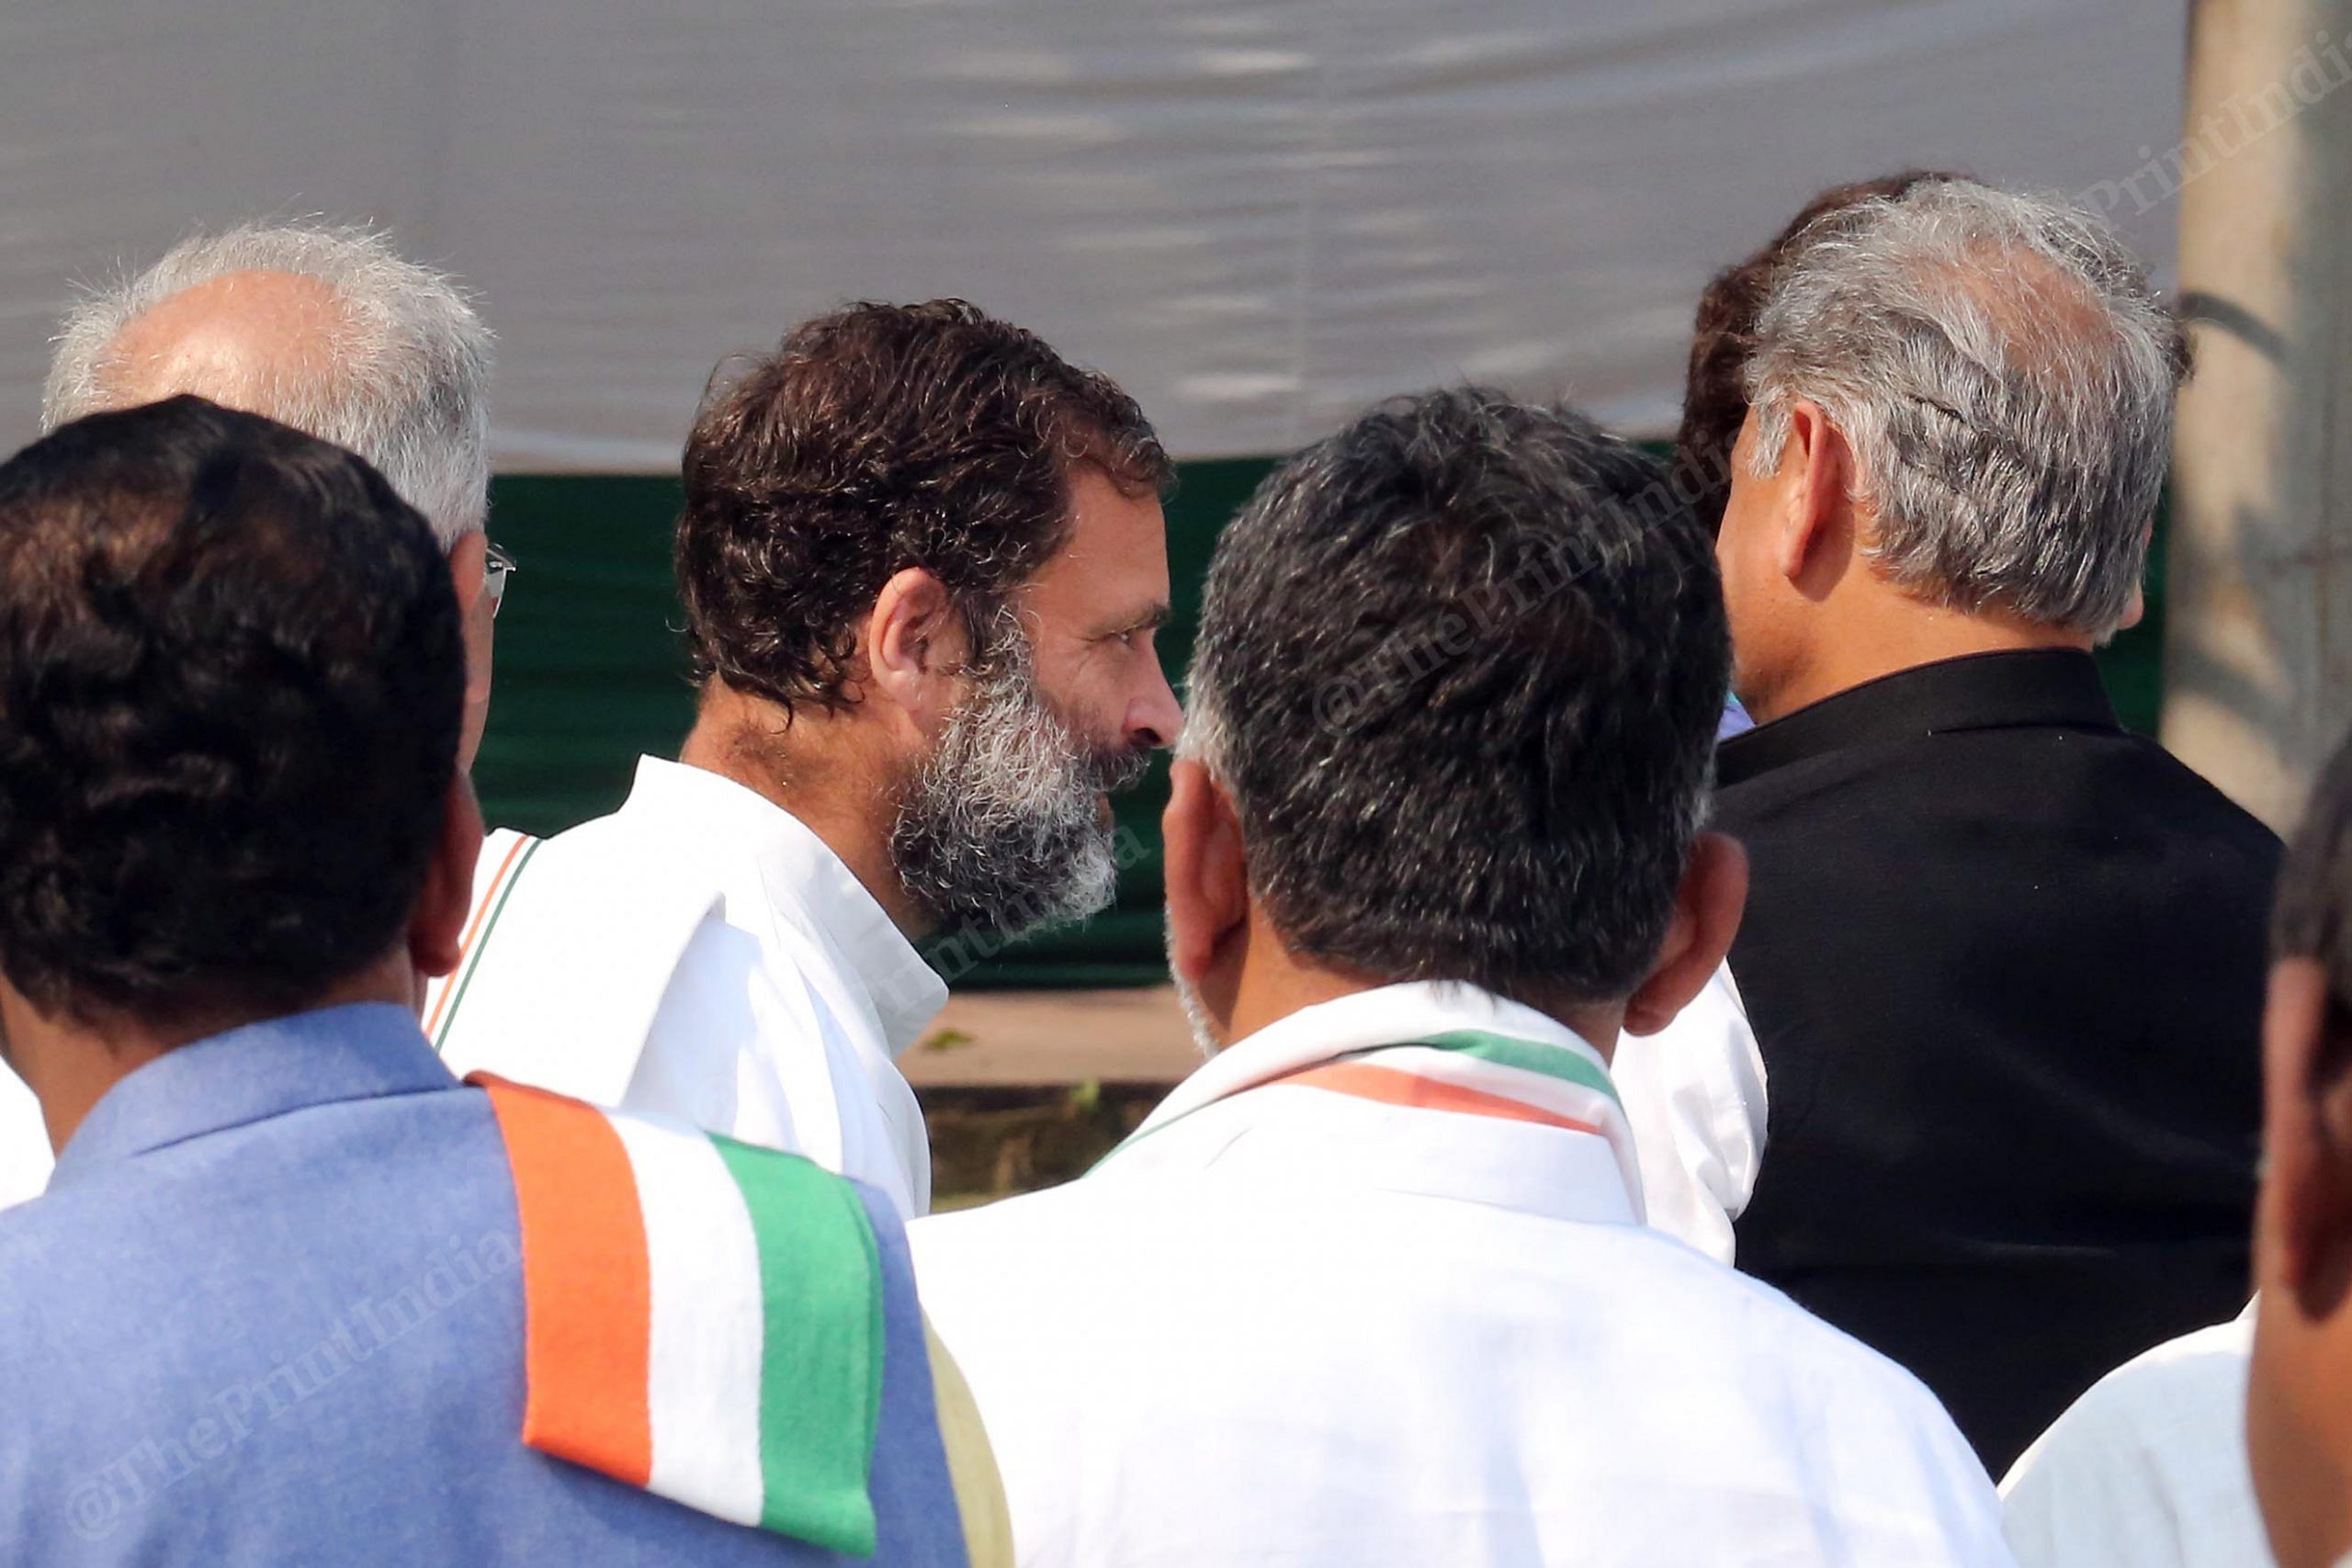 Congress MP Rahul Gandhi passing near Rajasthan CM Ashok Gehlot and Chhattisgarh CM Bhupesh Baghel during a ceremony for presentation of certificate of election to the former, at AICC Headquarters | Praveen Jain | ThePrint